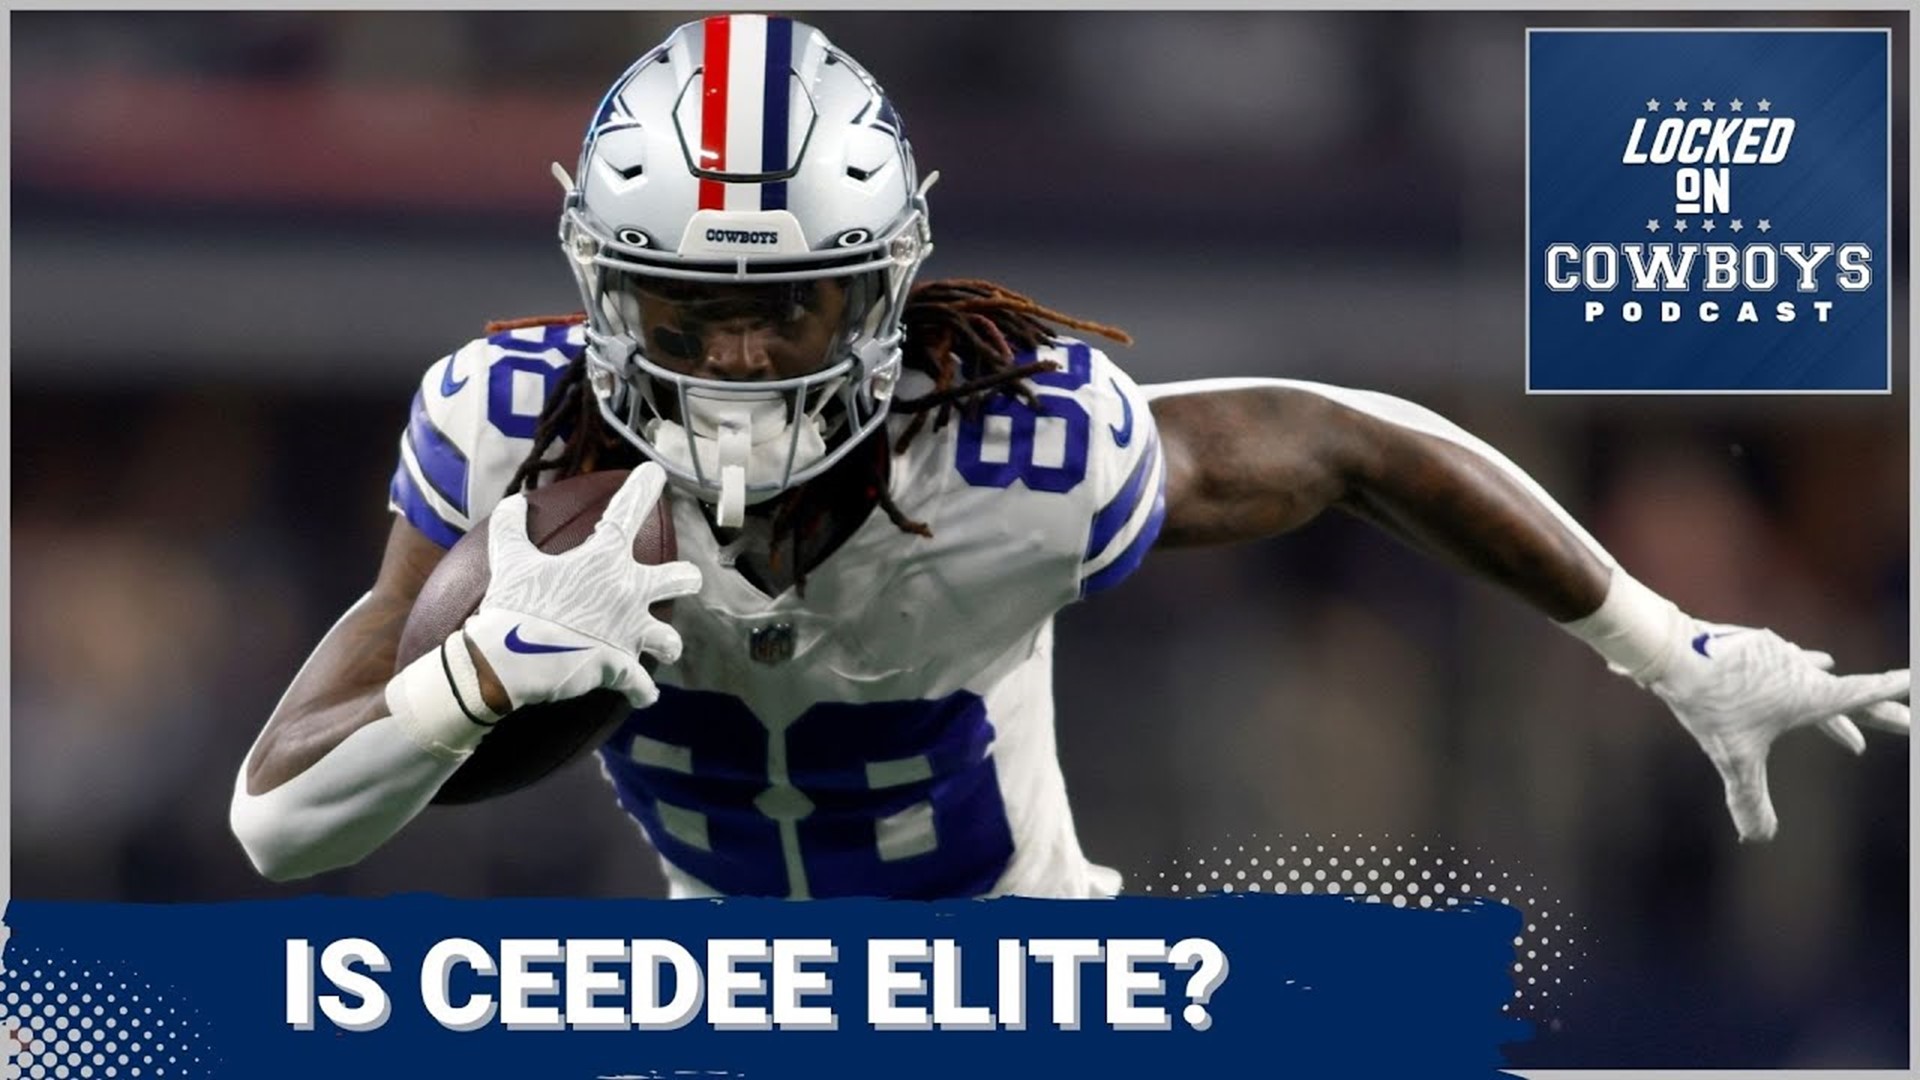 Marcus Mosher and Landon McCool talk Odell Beckham Jr.'s recent visit to the Cowboys. Why didn't the Cowboys offer him a deal? Also: Is CeeDee Lamb an elite WR now?